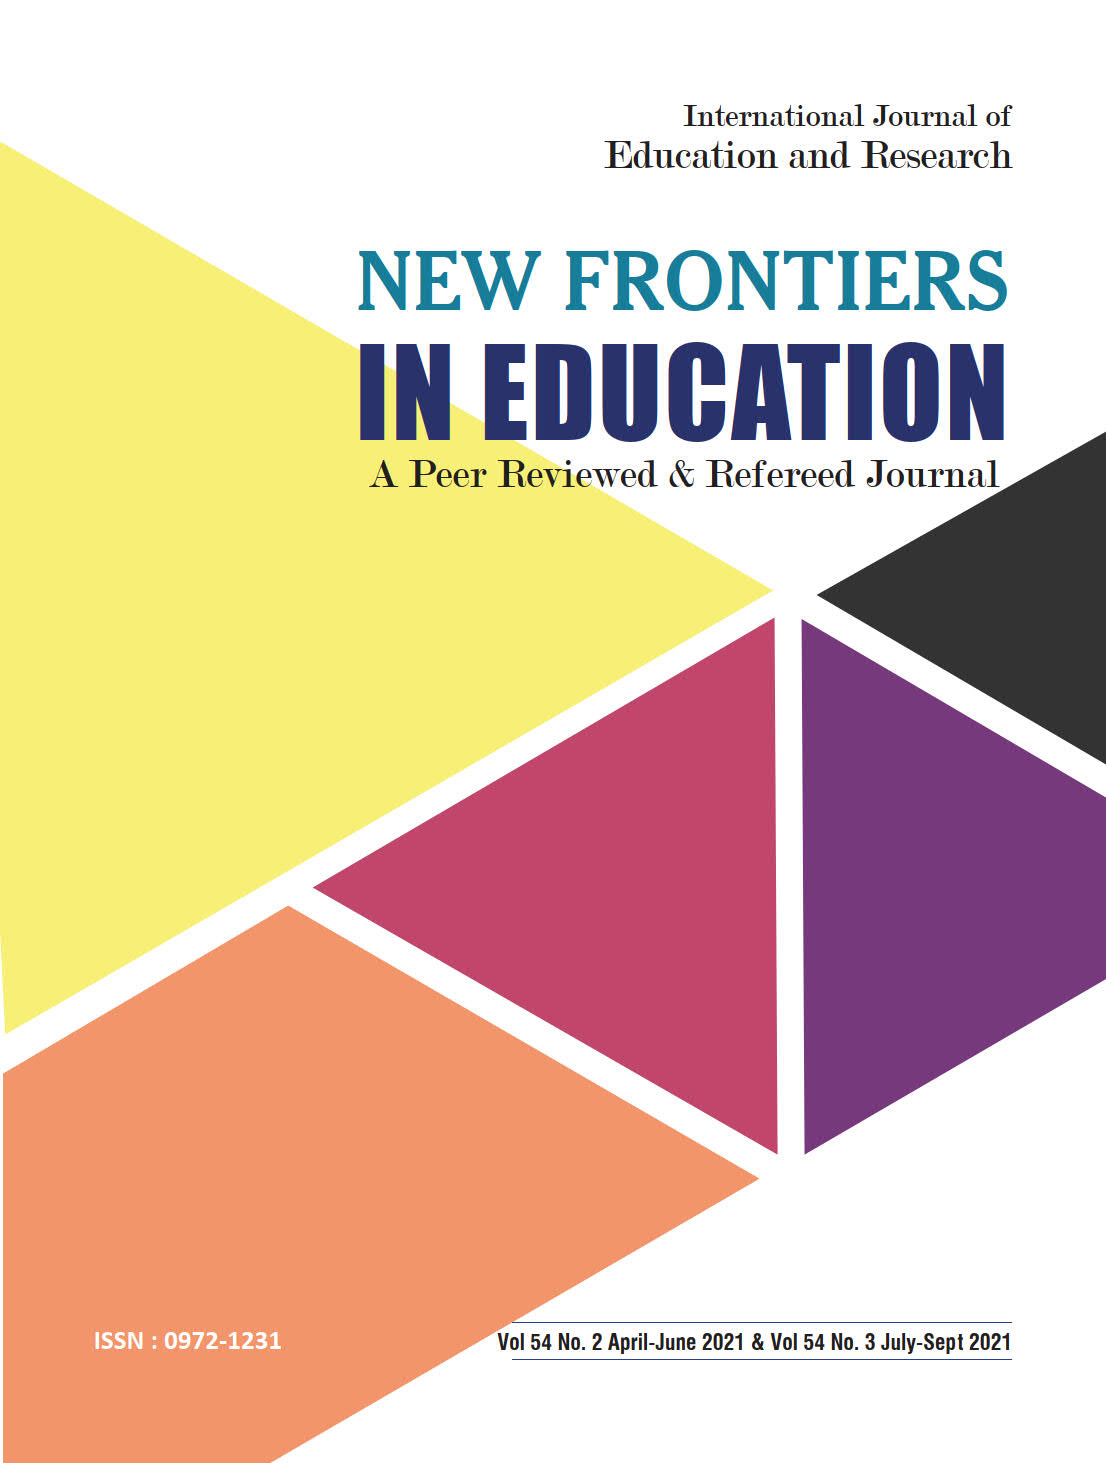 IJE&R : NEW FRONTIERS IN EDUCATION : Vol 54 No. 2 April-June 2021 & Vol 54 No. 3 July-Sept 2021